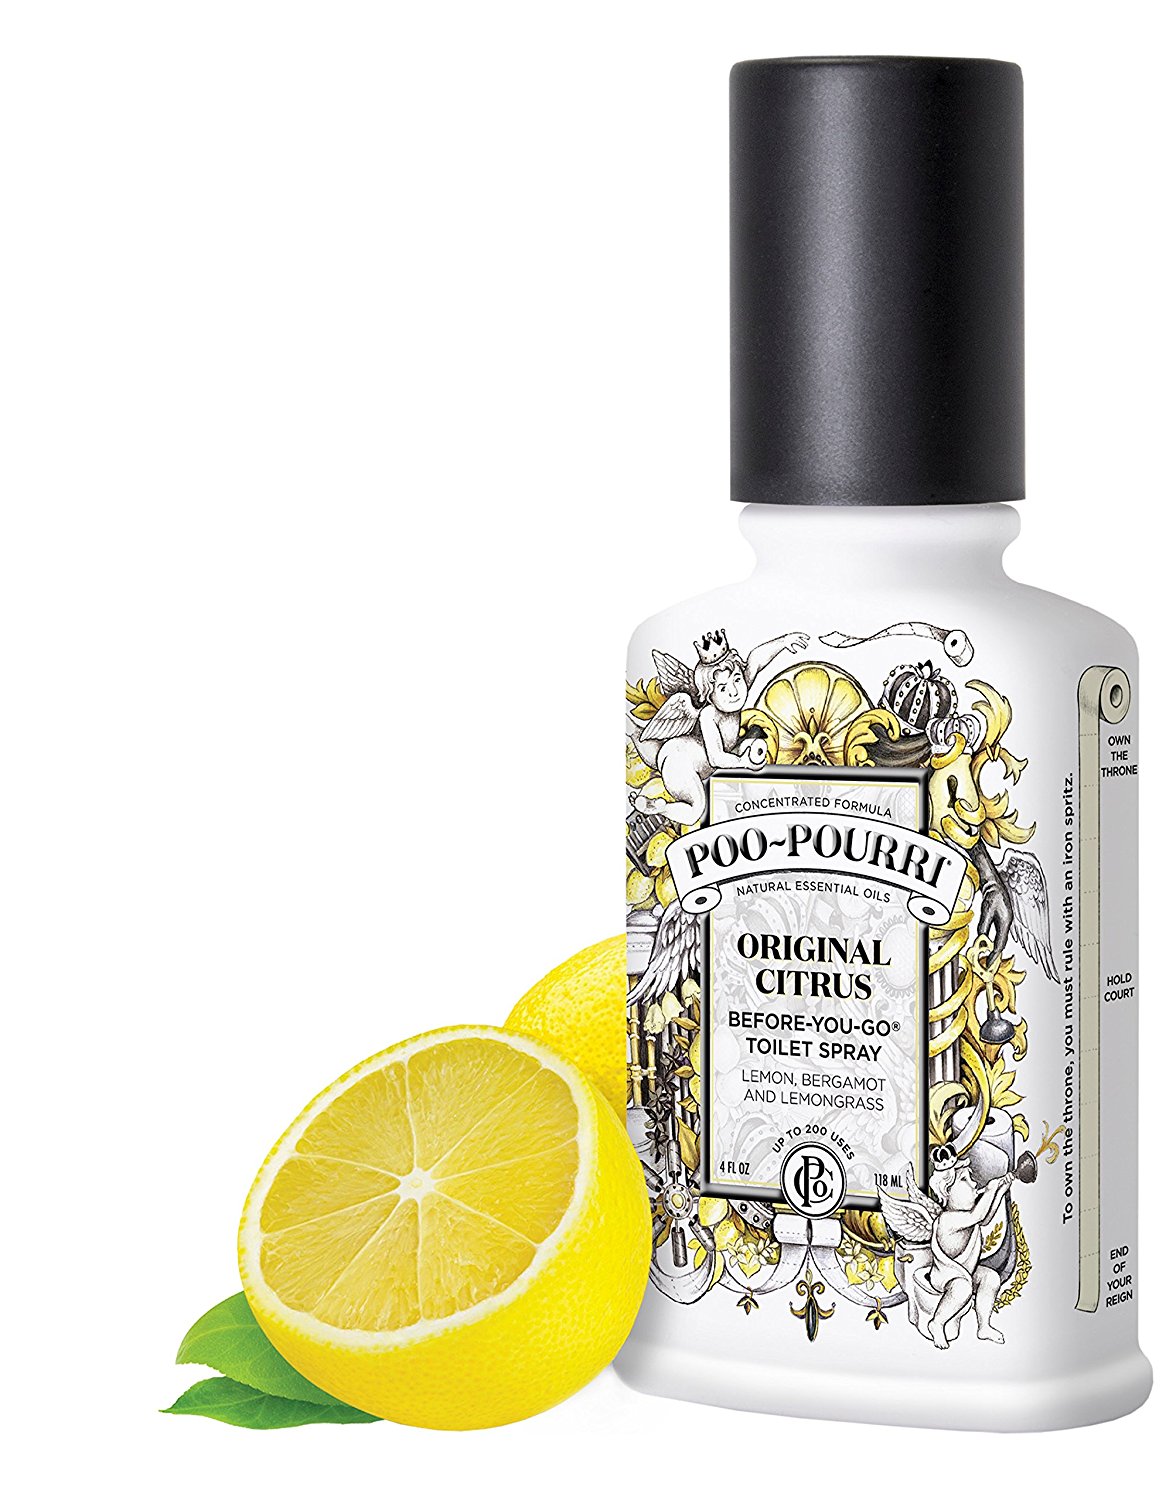 Prime Day Deal – Poo-Pourri Before-You-Go Toilet Spray 4-Ounce Bottle – Just $8.88!